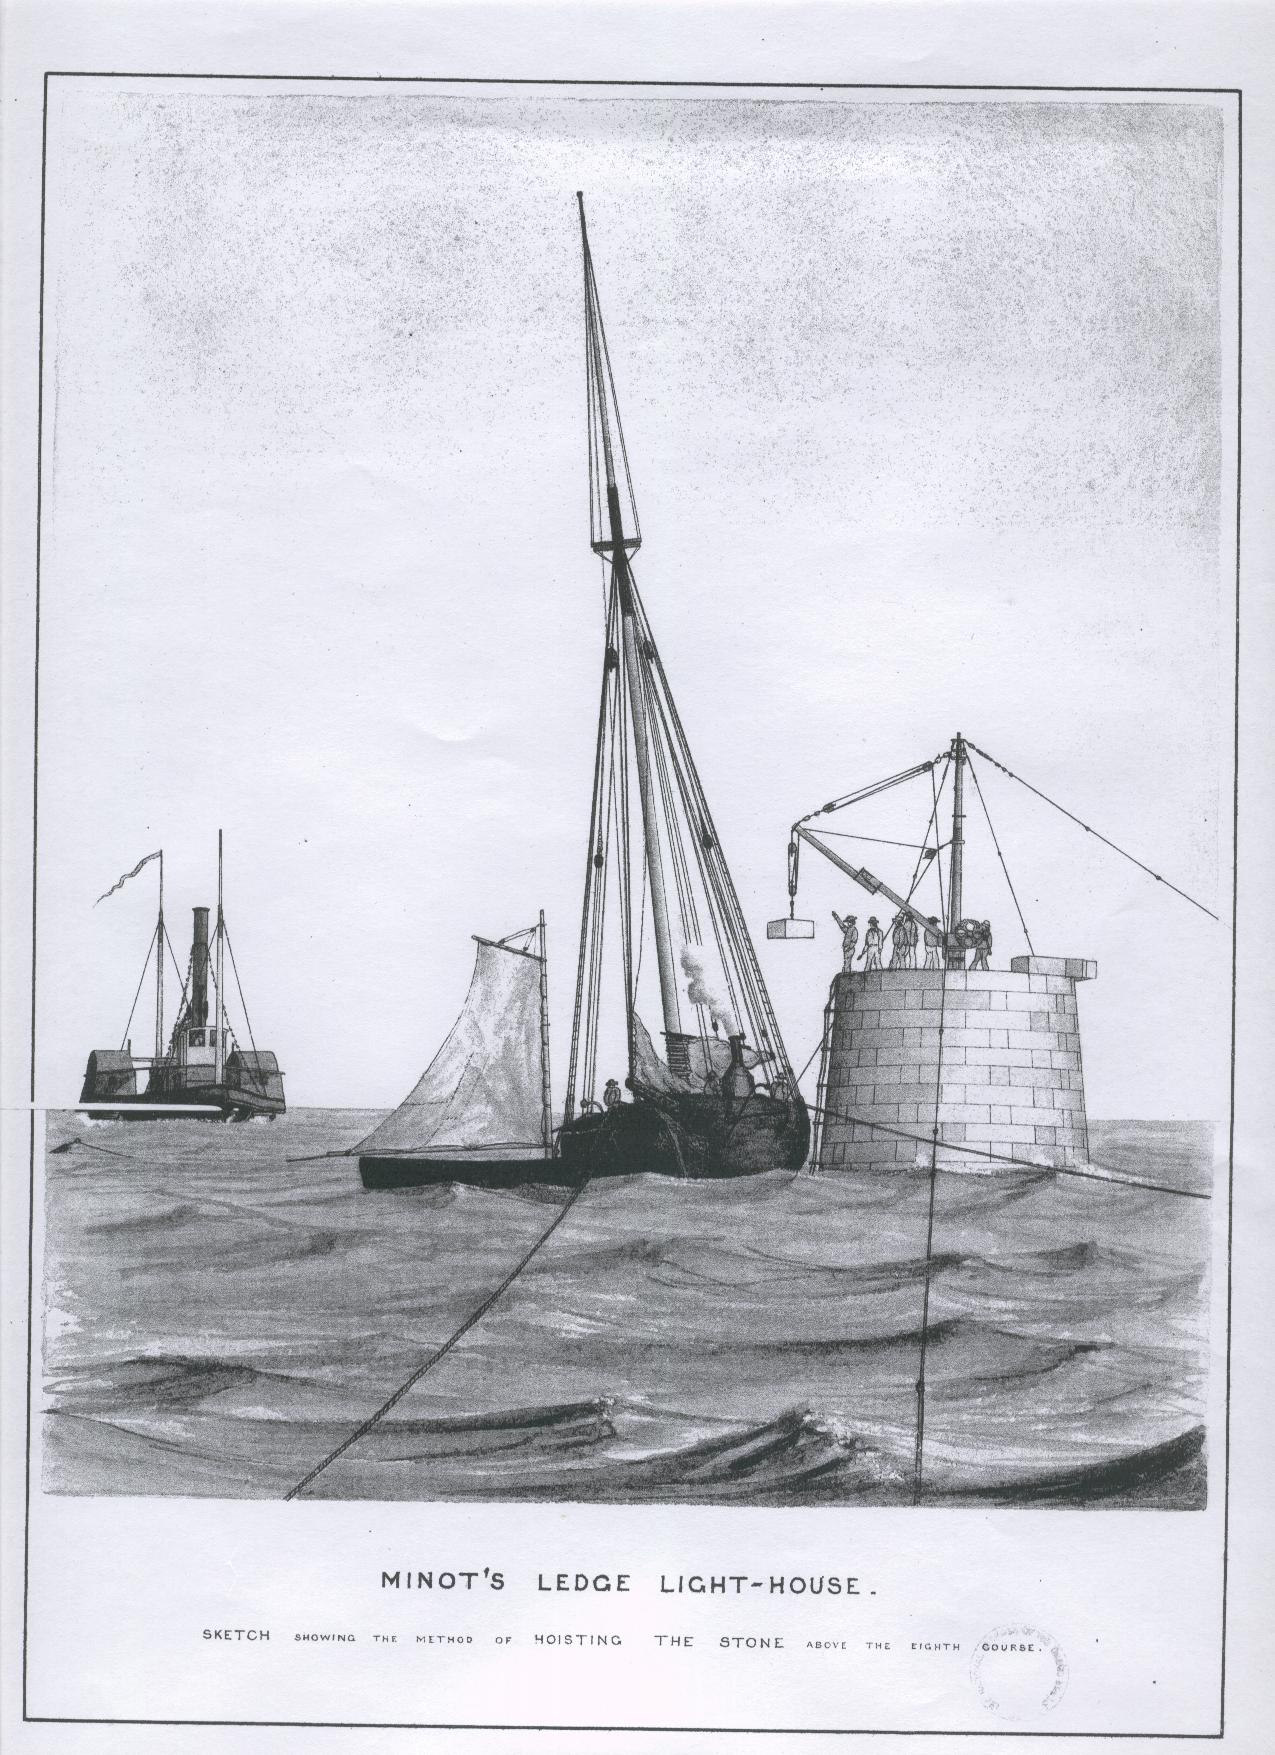 Engraving of early construction showing the steam-powered lighthouse tender Van Santvoort and a construction barge. (U.S. Coast Guard)